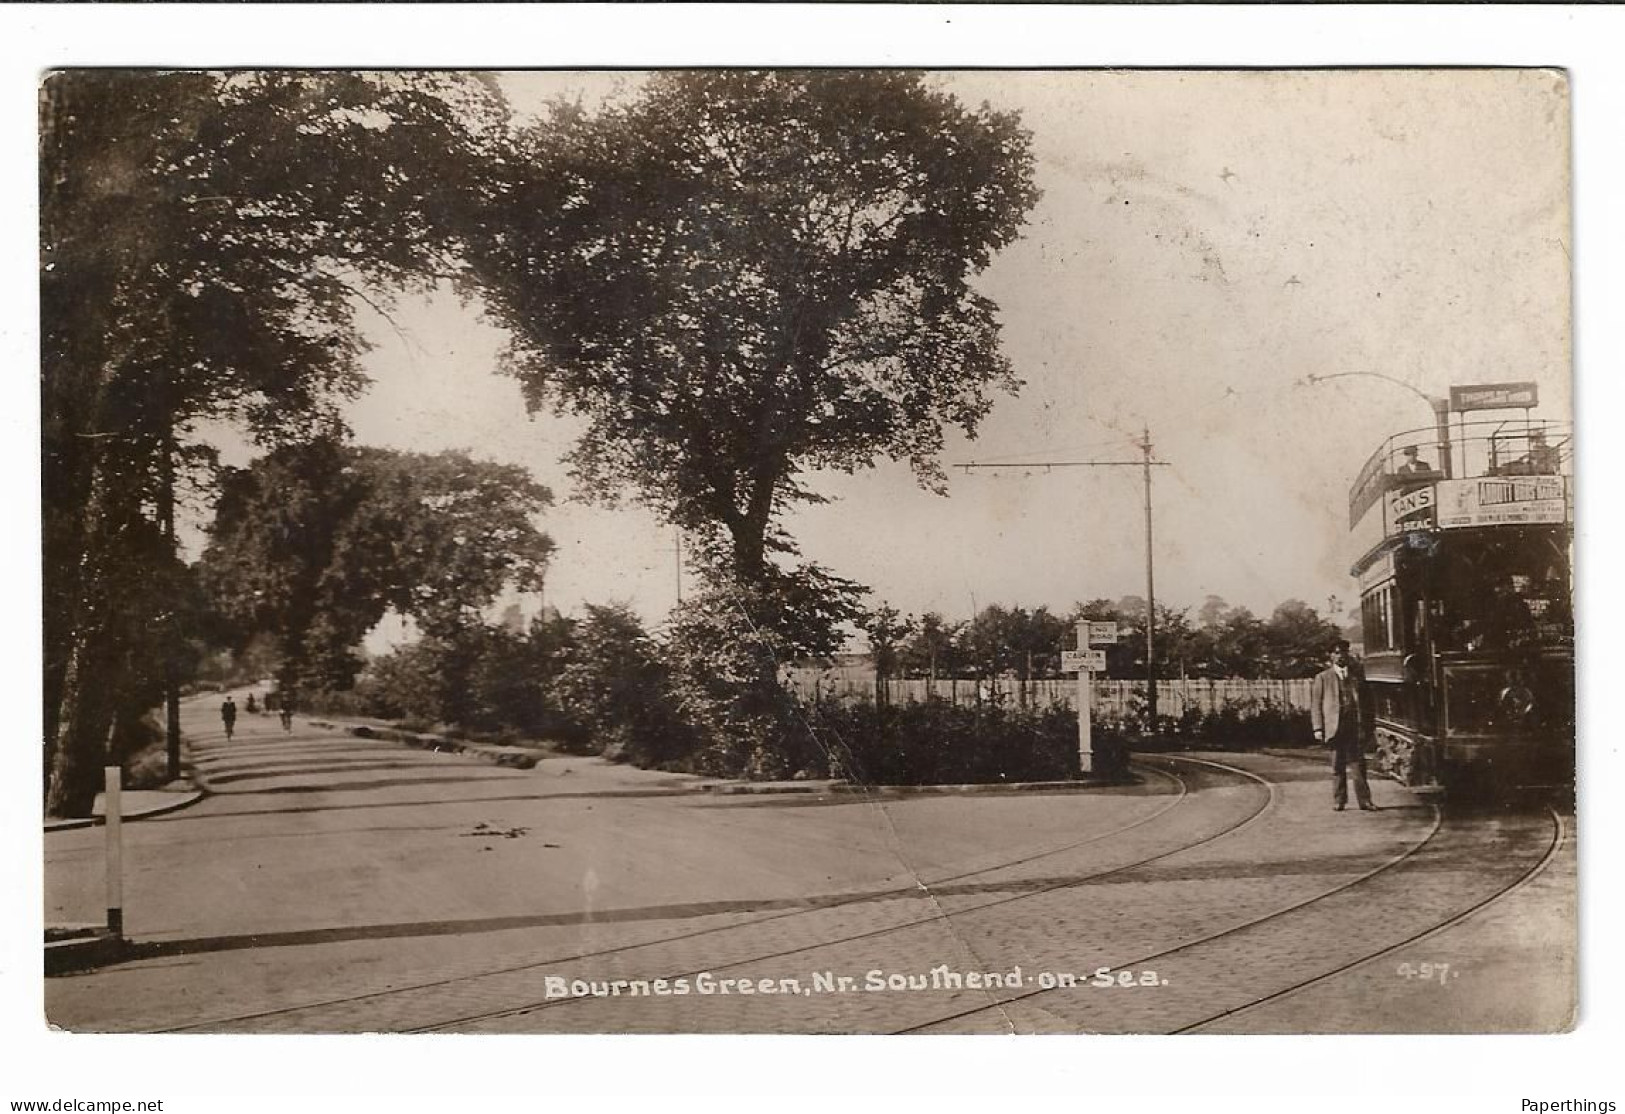 Real Photo Postcard, Essex, Southend-on Sea, Bournes Green, Tram, Road, Street. Early 1900s. - Southend, Westcliff & Leigh